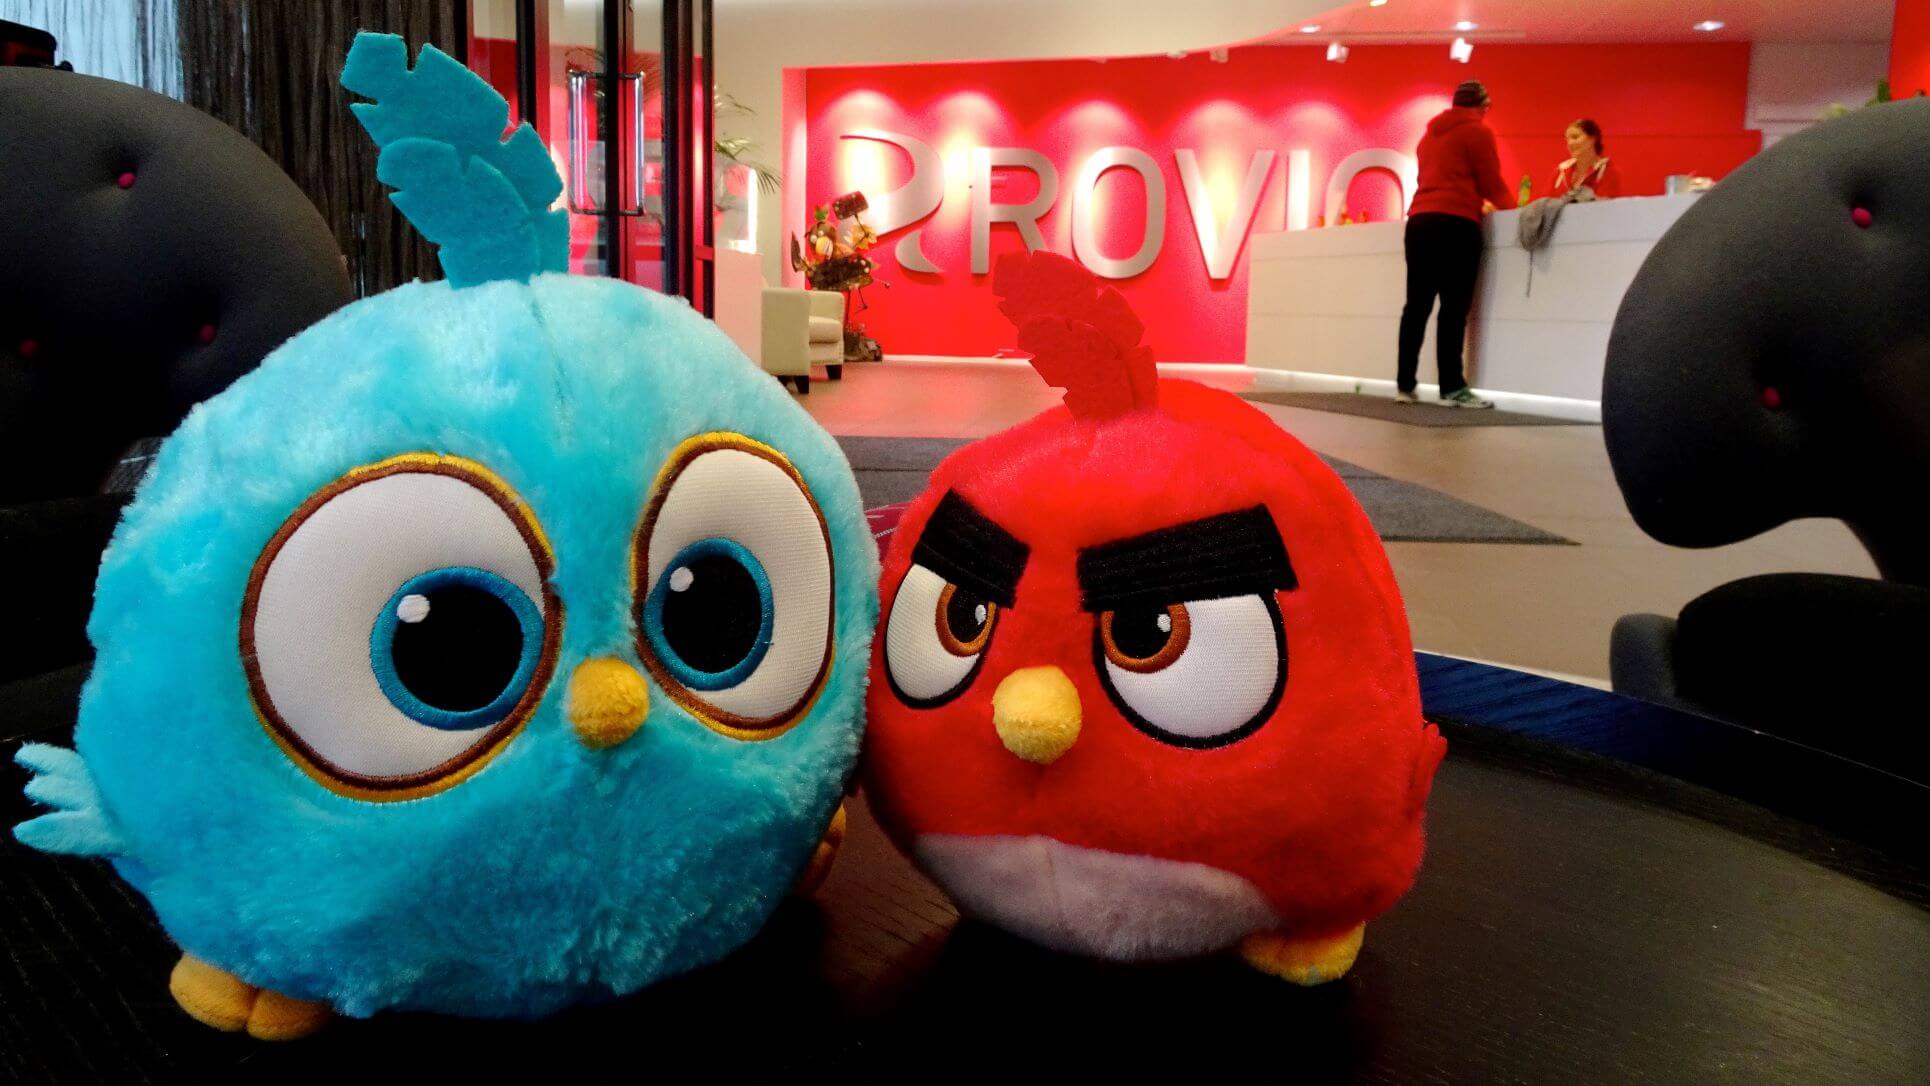 'Angry Birds' Maker Rovio Gets Sweetened $738 Million Offer From Playtika